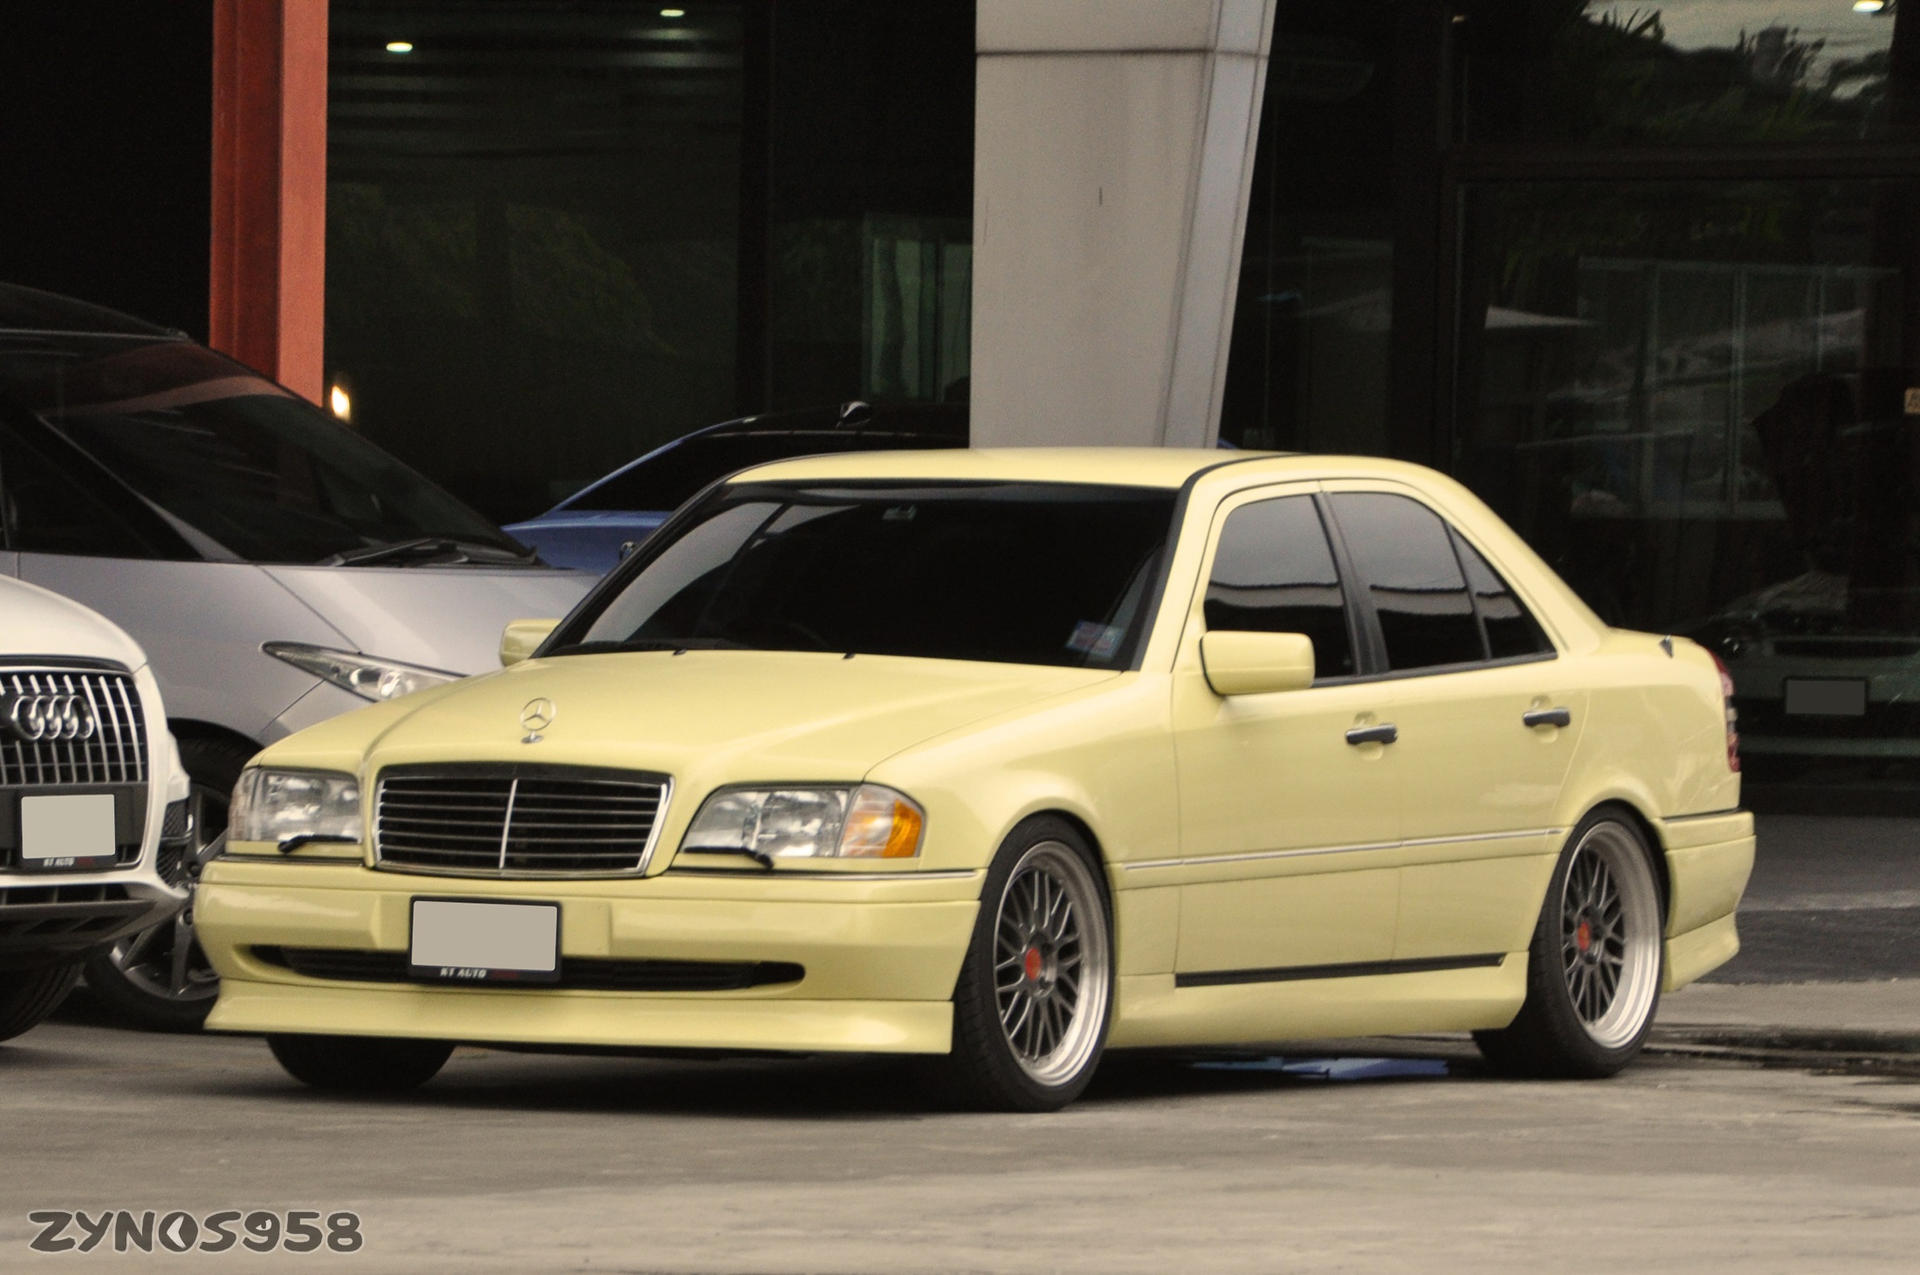 Another W202 C180 Amg By Zynos958 On Deviantart